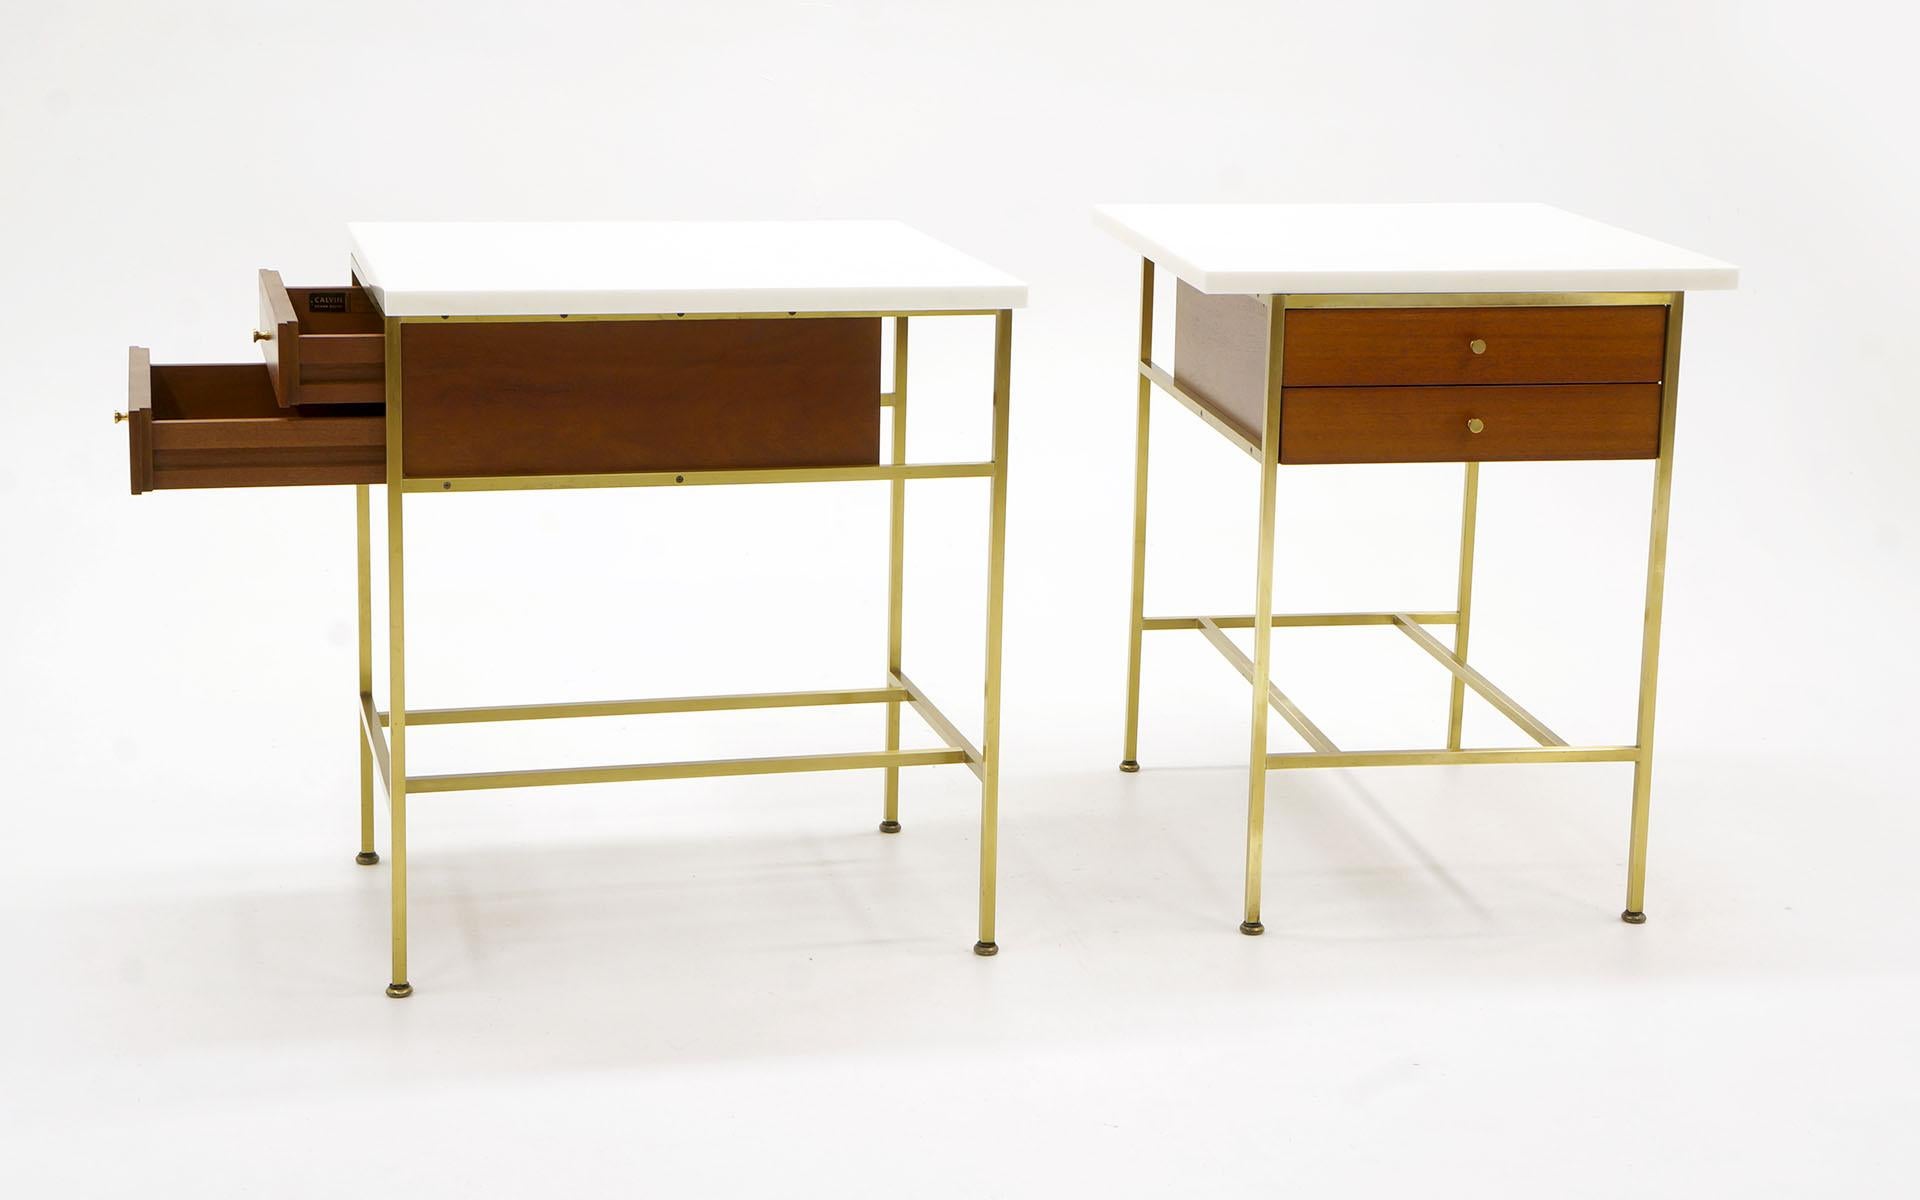 Paul McCobb pair of night stands / side tables. One of the most desirable forms. Solid brass tube frames, mahogany case with milk glass tops and original brass pulls. Signed with the Paul McCobb Irwin Collection for Calvin Furniture label. These